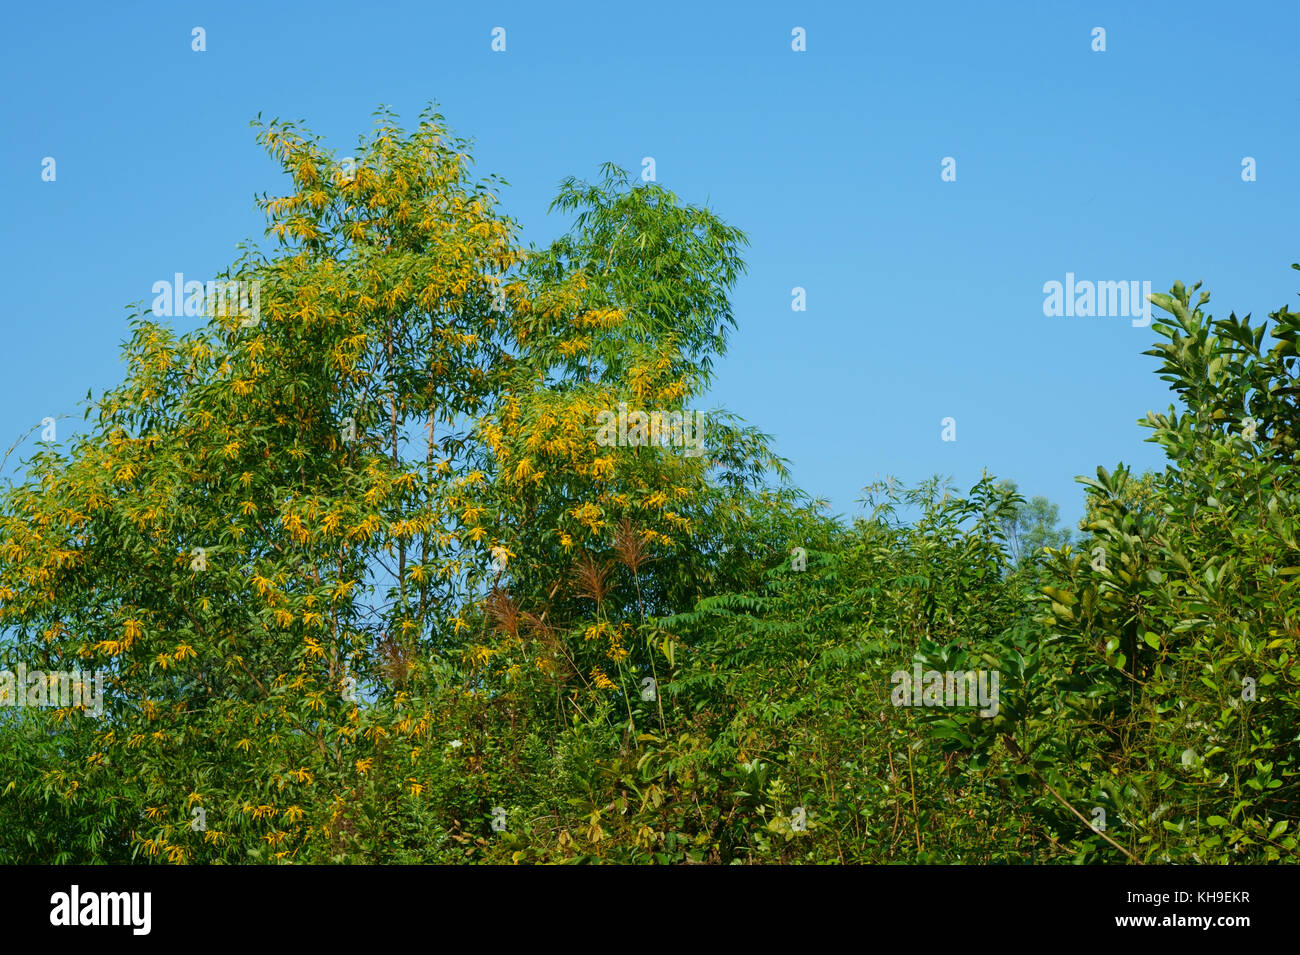 Foliage and sky with autumn colors Stock Photo